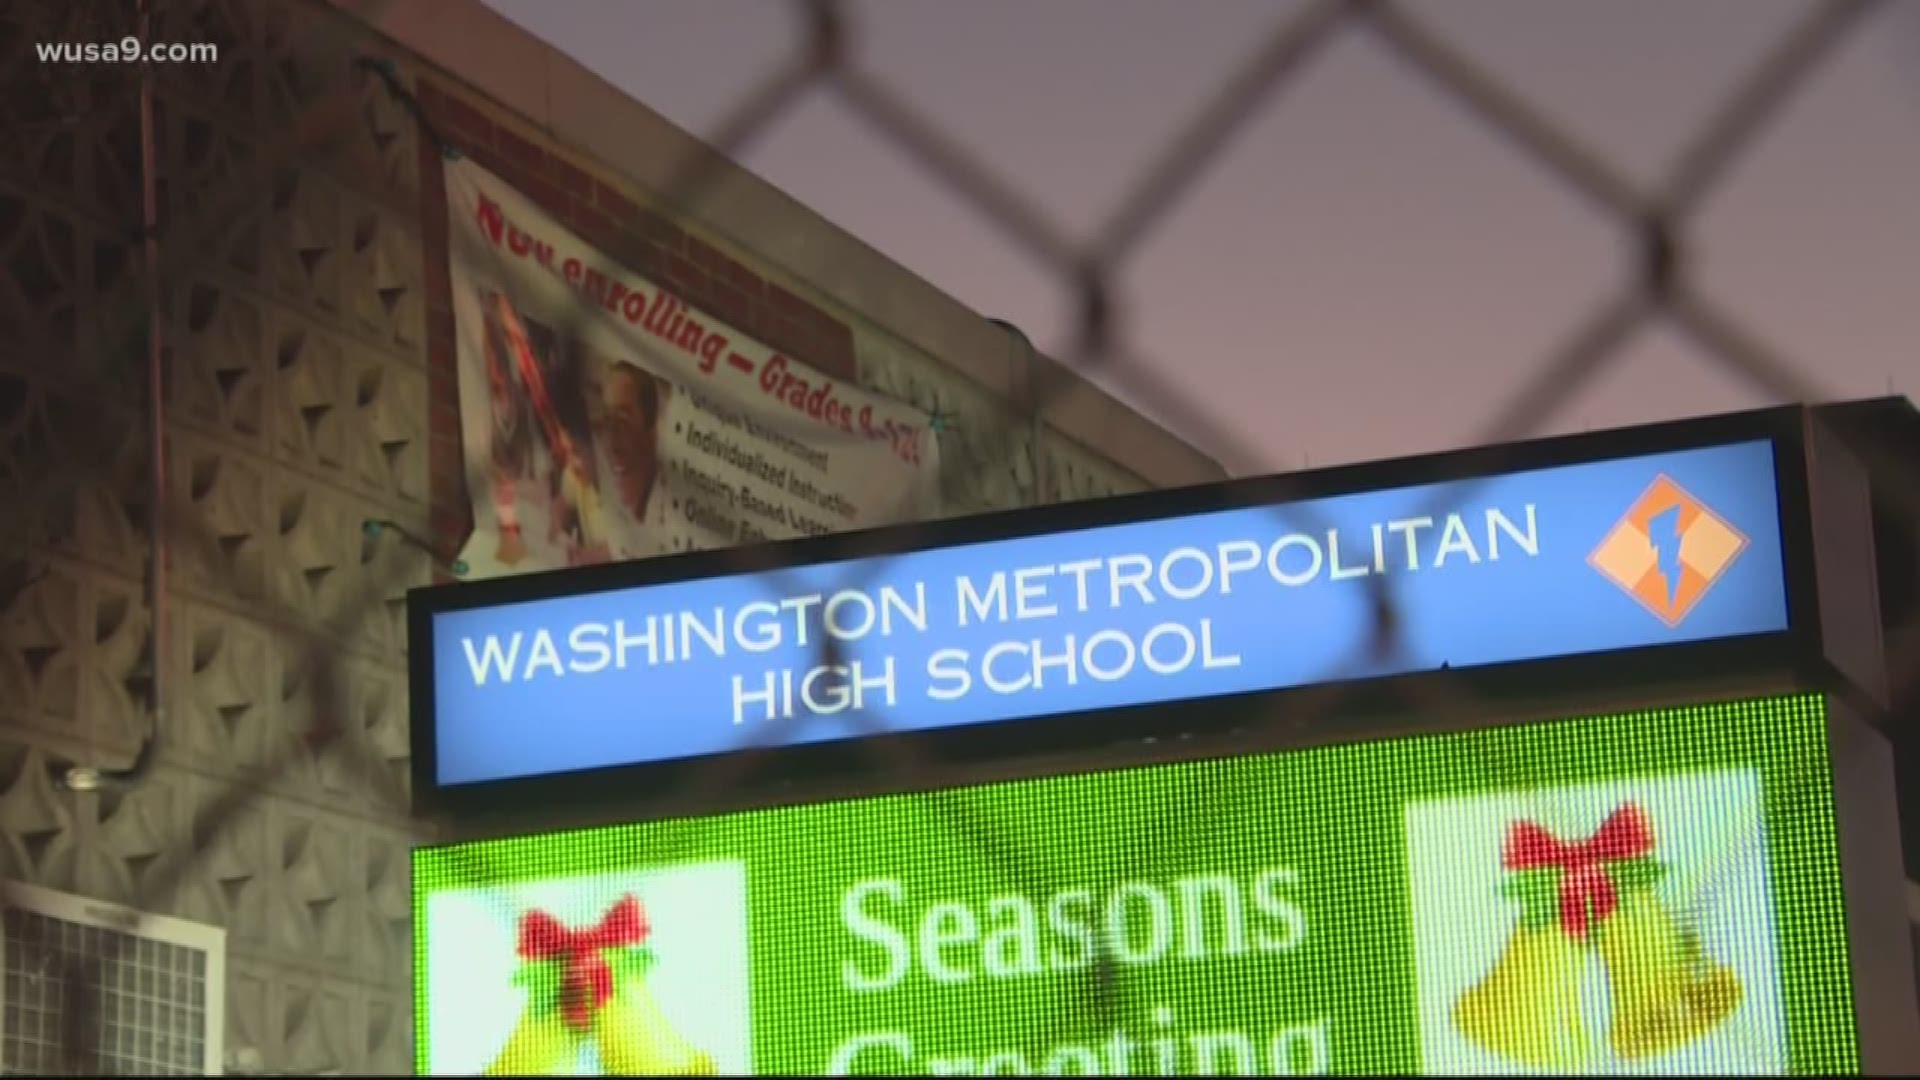 The alternative school in Northwest D.C. will be officially closing at the end of the 2020 school year.